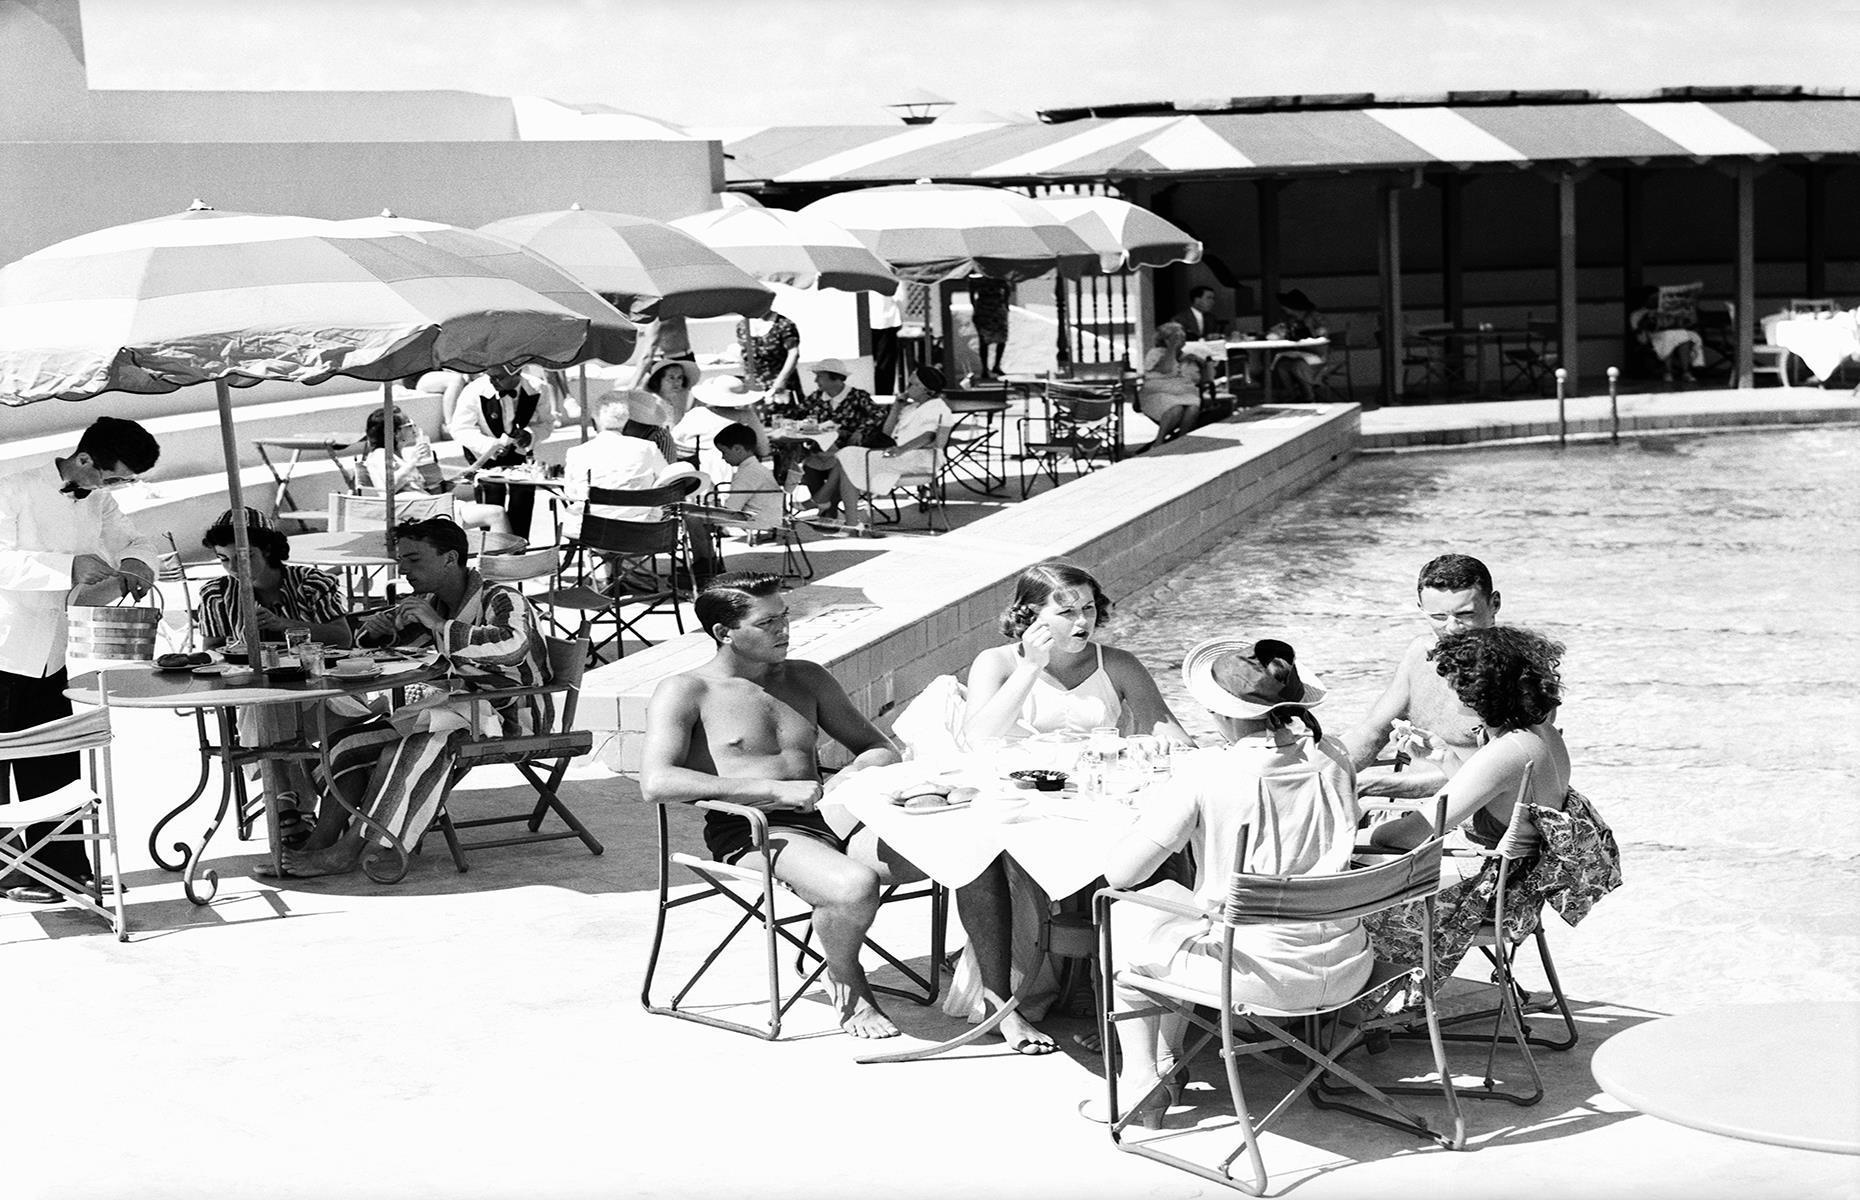 Miami mushroomed in popularity in the first half of the 20th century. Glitzy hotels and resorts sprang up here and vacationers flocked to the city's sand-trimmed shores. This photo dates to the 1930s and captures a group of young holidaymakers having lunch by the pool at a Miami hotel.